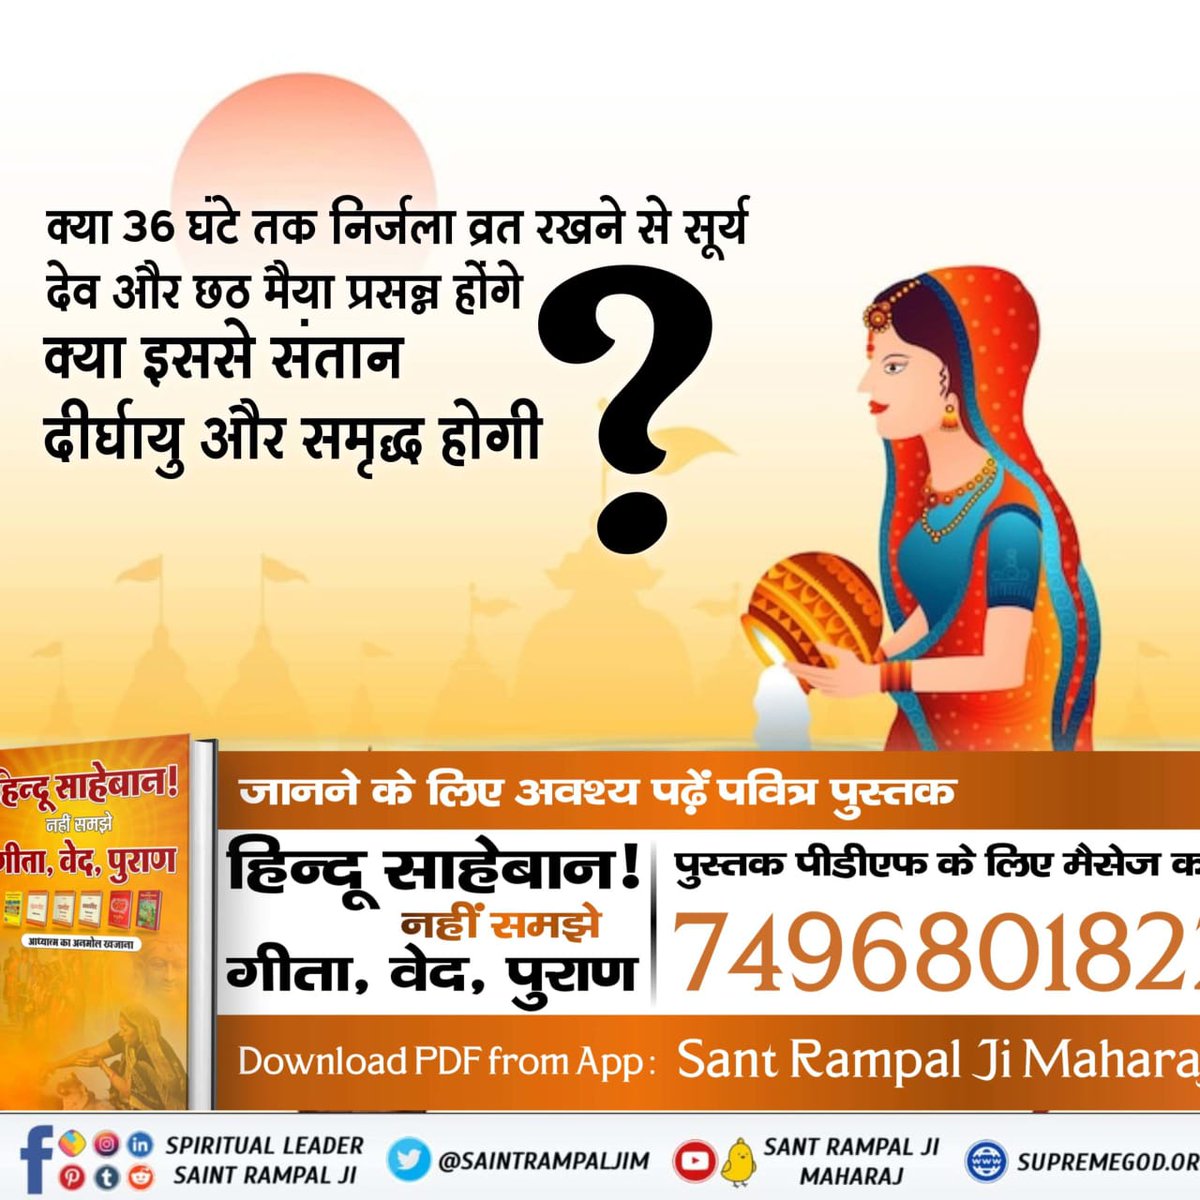 #GodNightFriday
Will Sun God and Chhath Maiya be pleased if we keep a waterless fast for 36 hours❓ Will this ensure long-lived and prosperous children❓

👉Learn amazing secrets in the holy book 'Hindu Sahebaan ! Nahin Samajhe Geeta, Ved, Puraan'